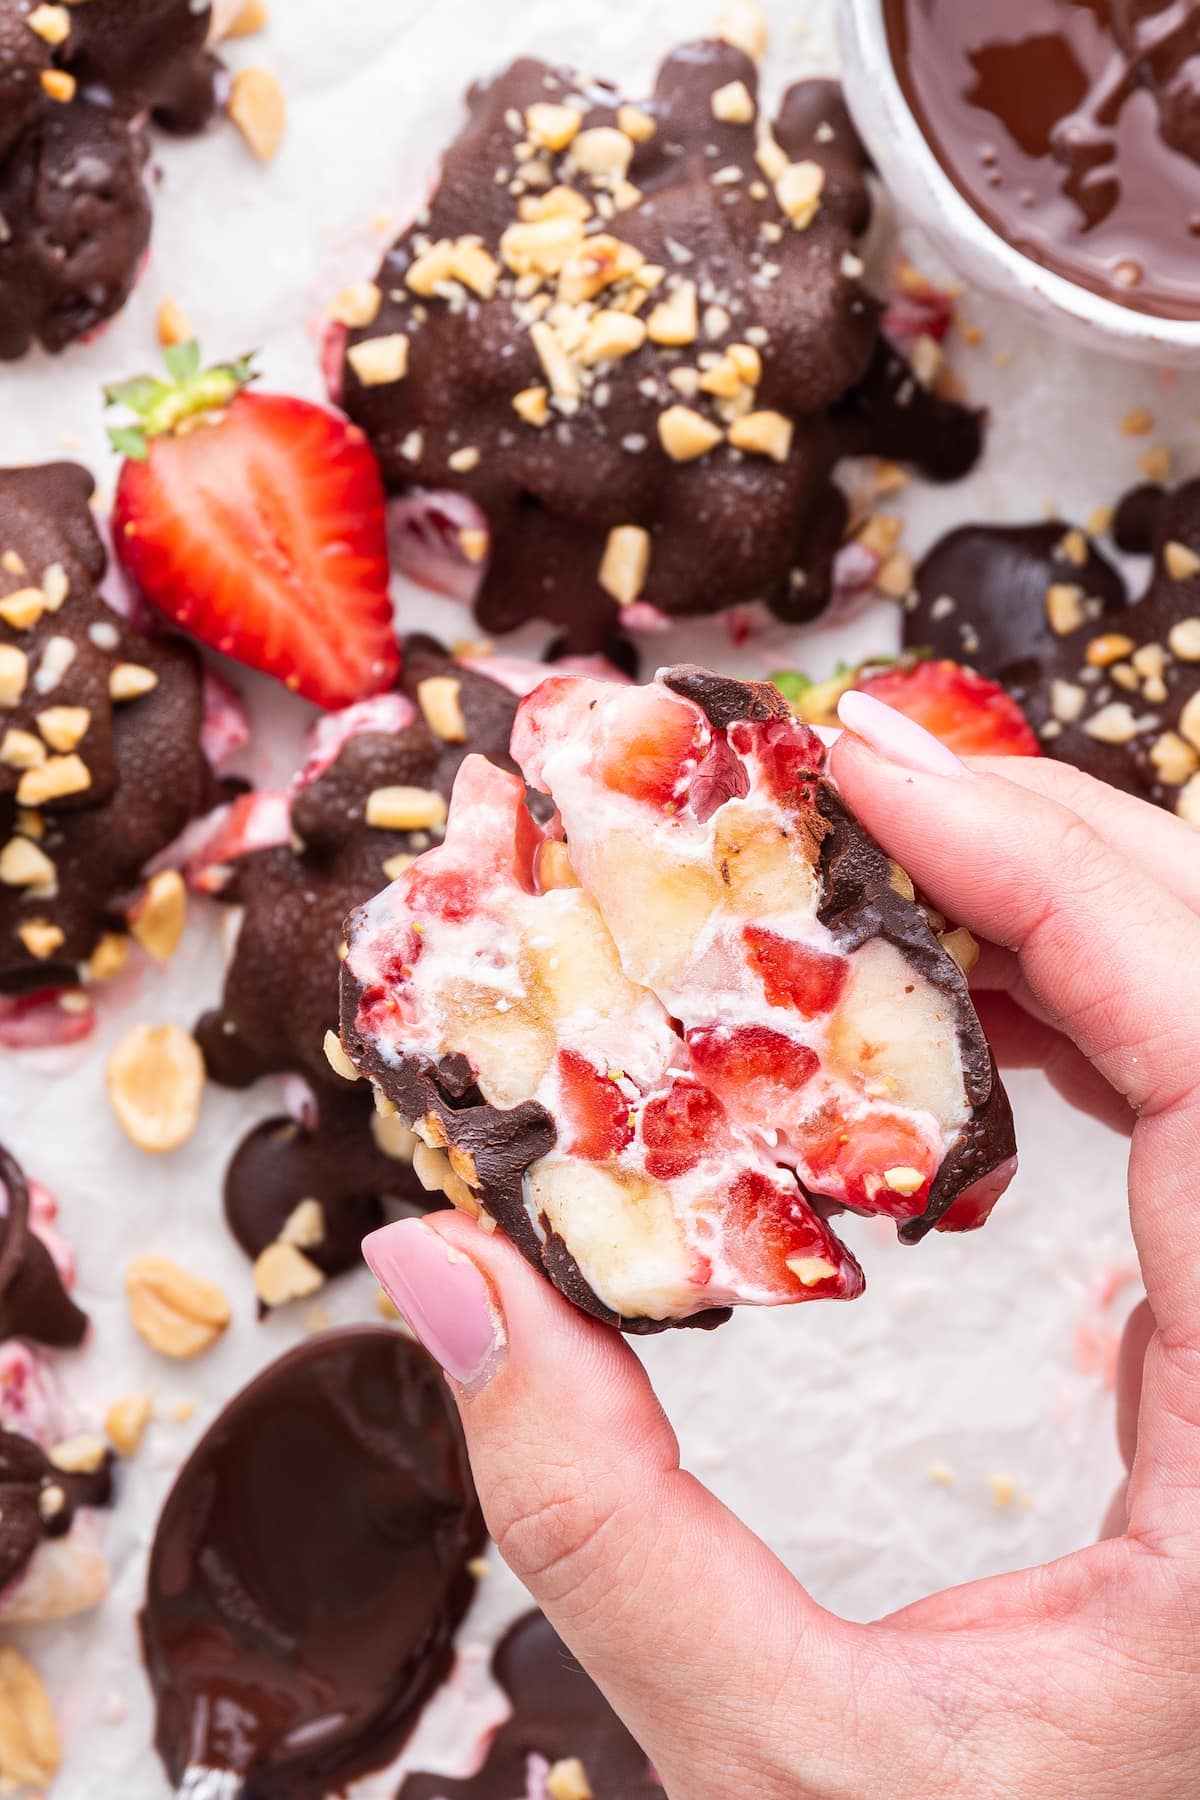 A woman's hand holding a chocolate strawberry banana yogurt cluster that is split in half.